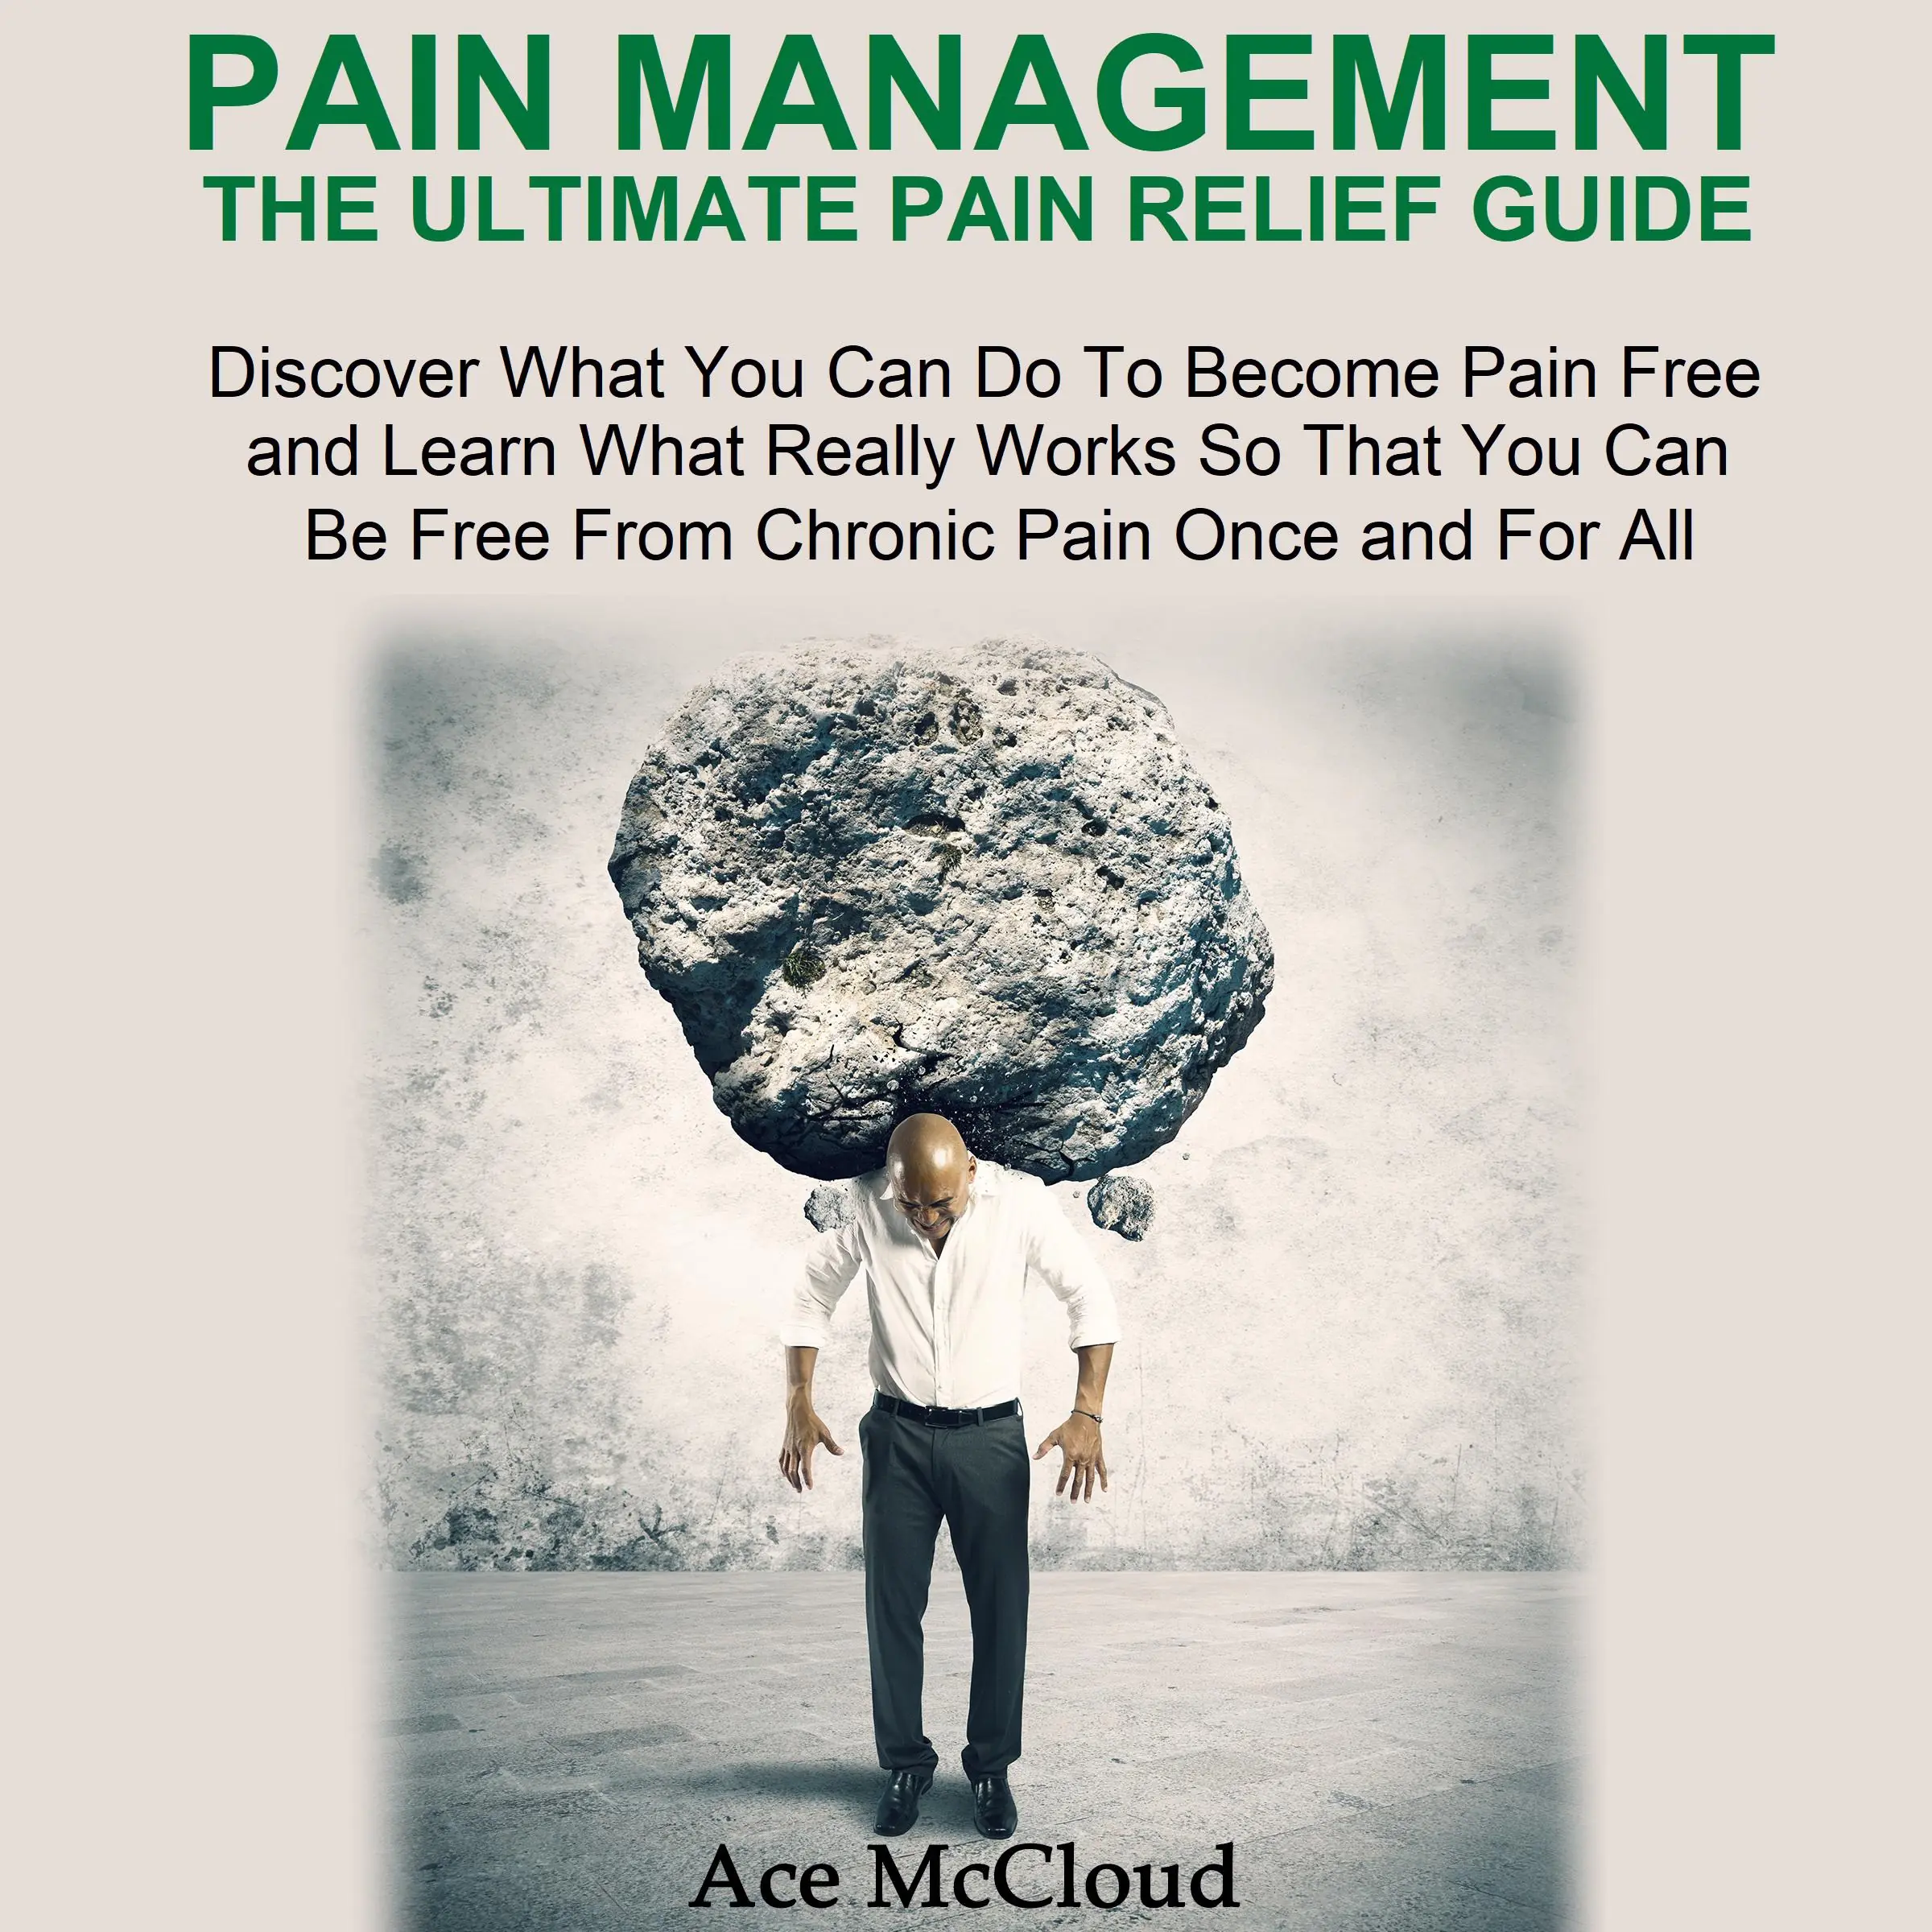 Pain Management: The Ultimate Pain Relief Guide: Discover What You Can Do To Become Pain Free and Learn What Really Works So That You Can Be Free From Chronic Pain Once and For All Audiobook by Ace McCloud